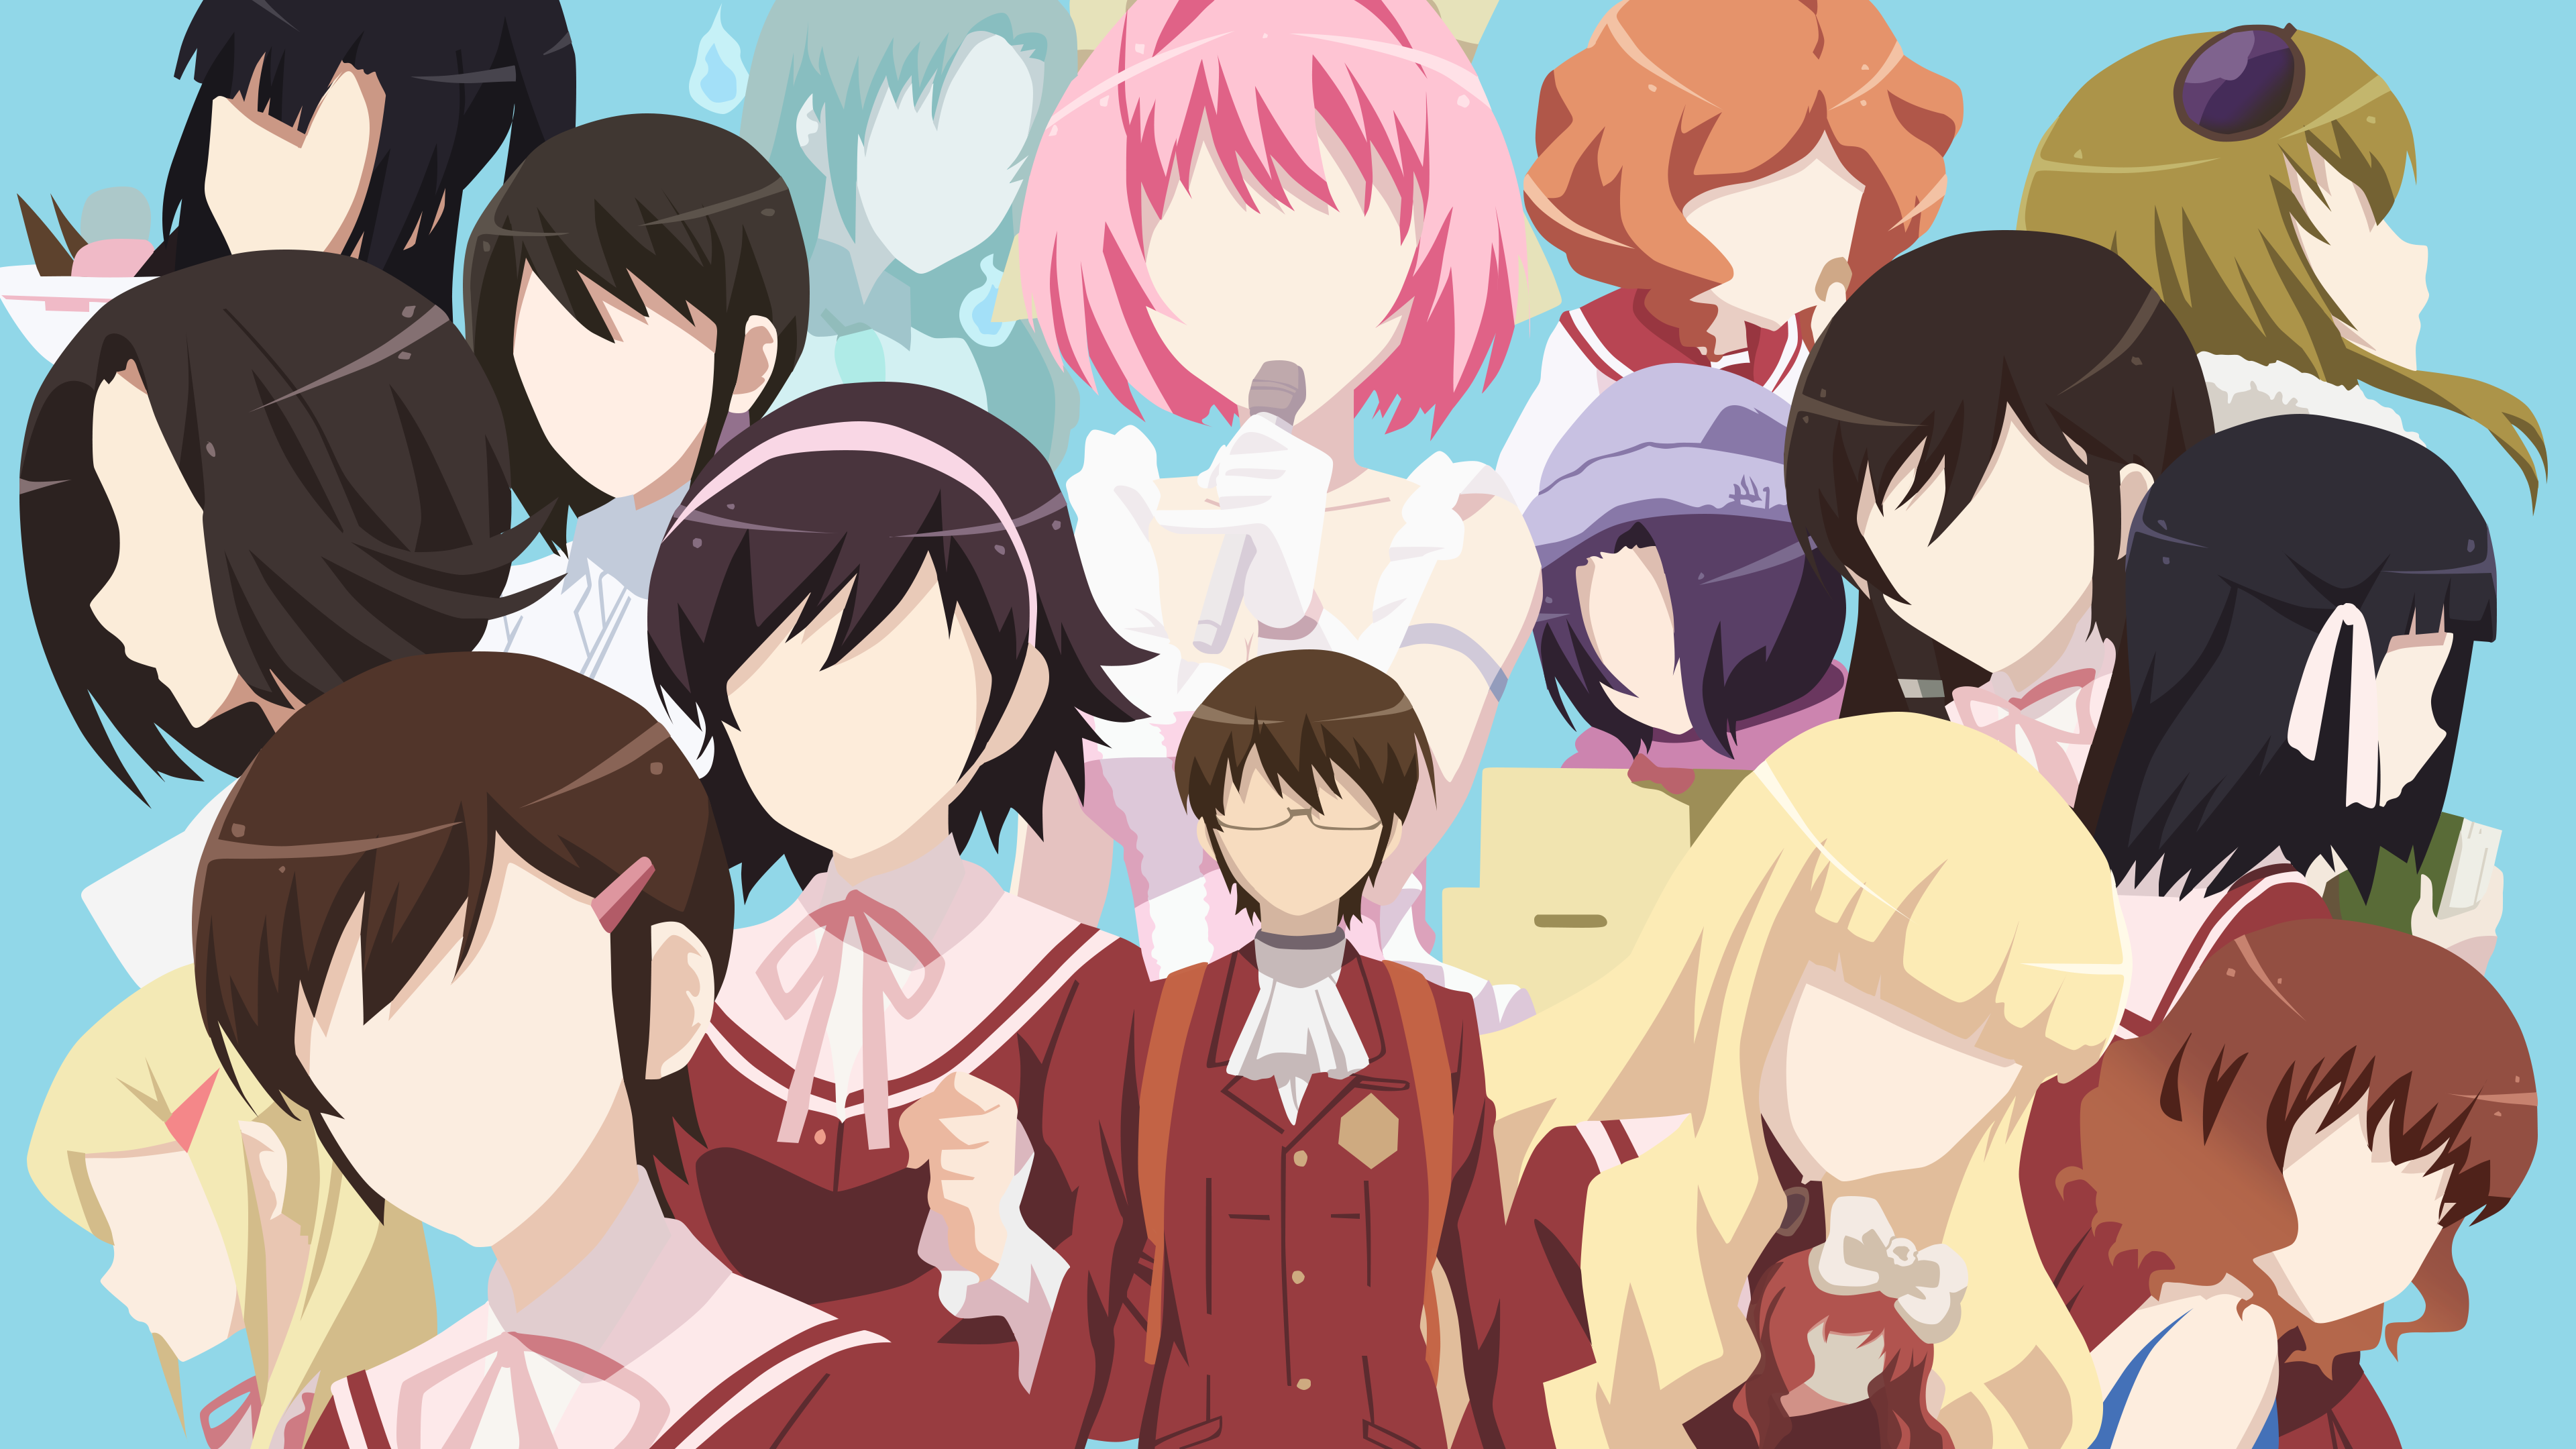 The World God Only Knows 4k Ultra HD Wallpaper by IcyRO-kun